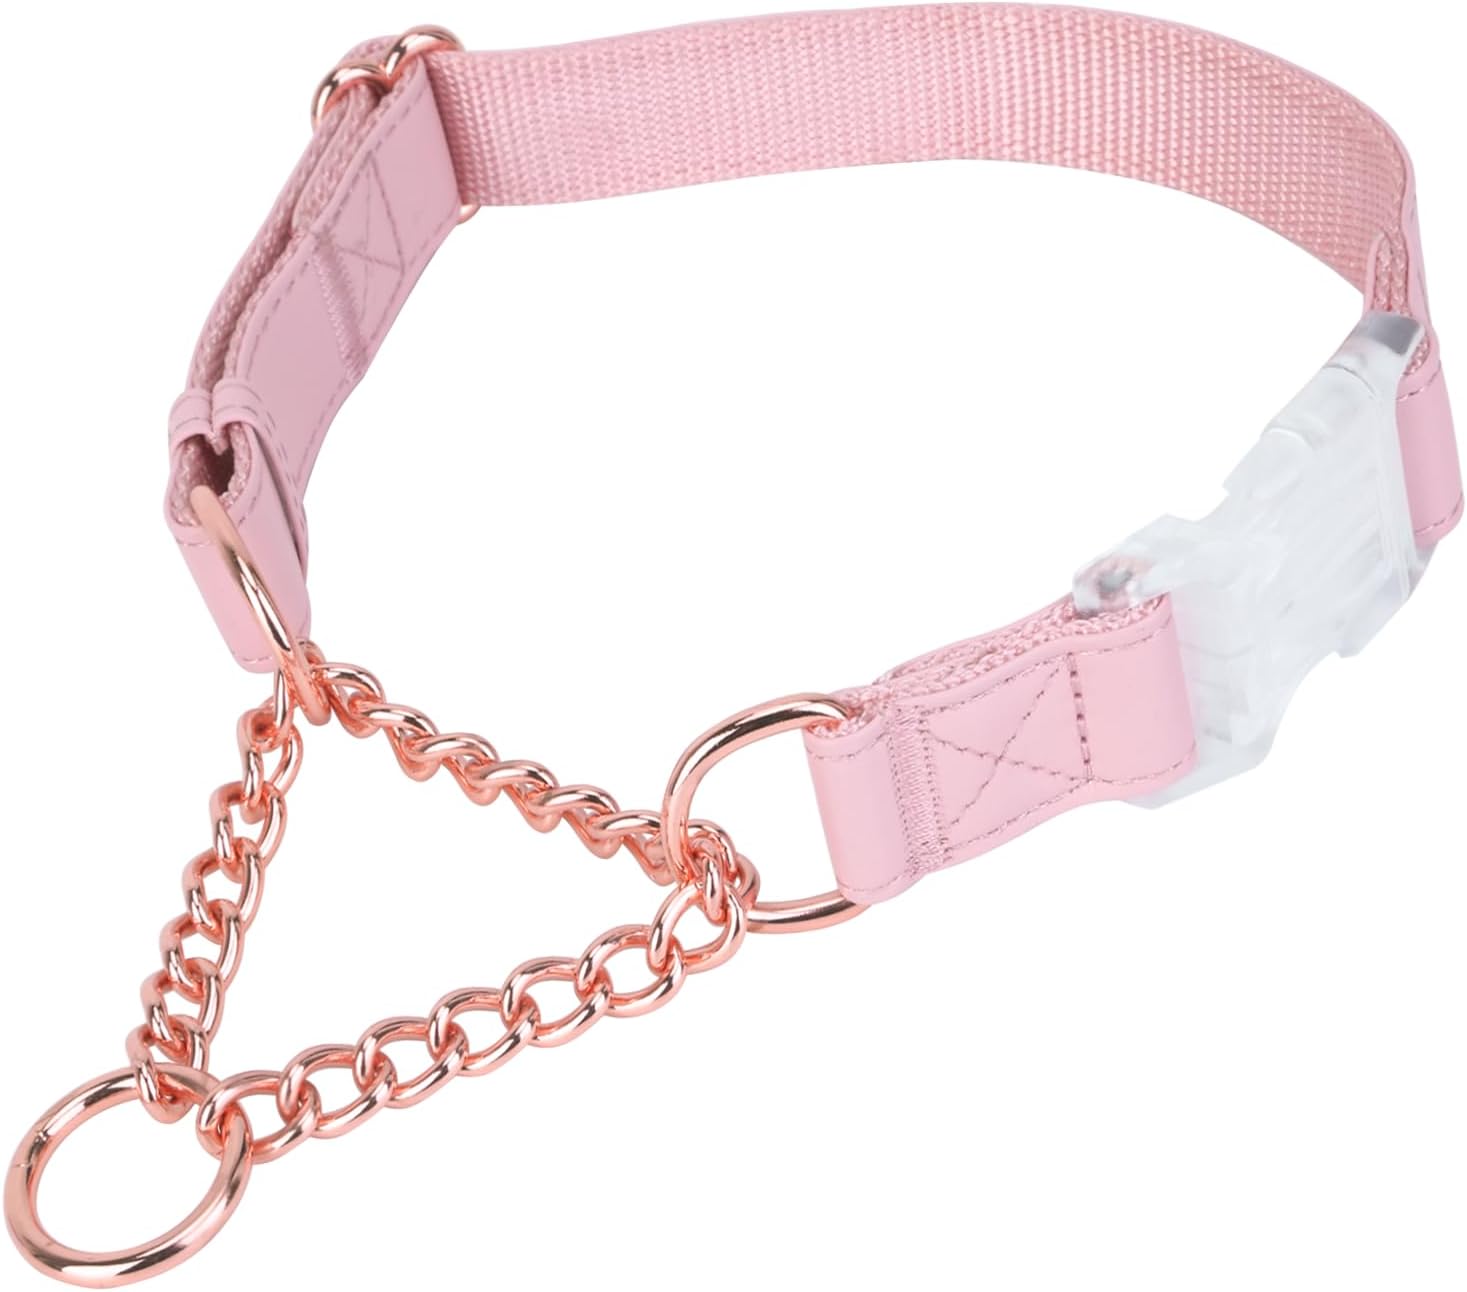 Soft Leather Martingale Collar for Dogs, Rose Gold Chain Limited Slip Collars with Quick Release Buckle, Stylish Adjustable Nylon No Pull Training Collar for Small Medium Large Dogs Pink ML